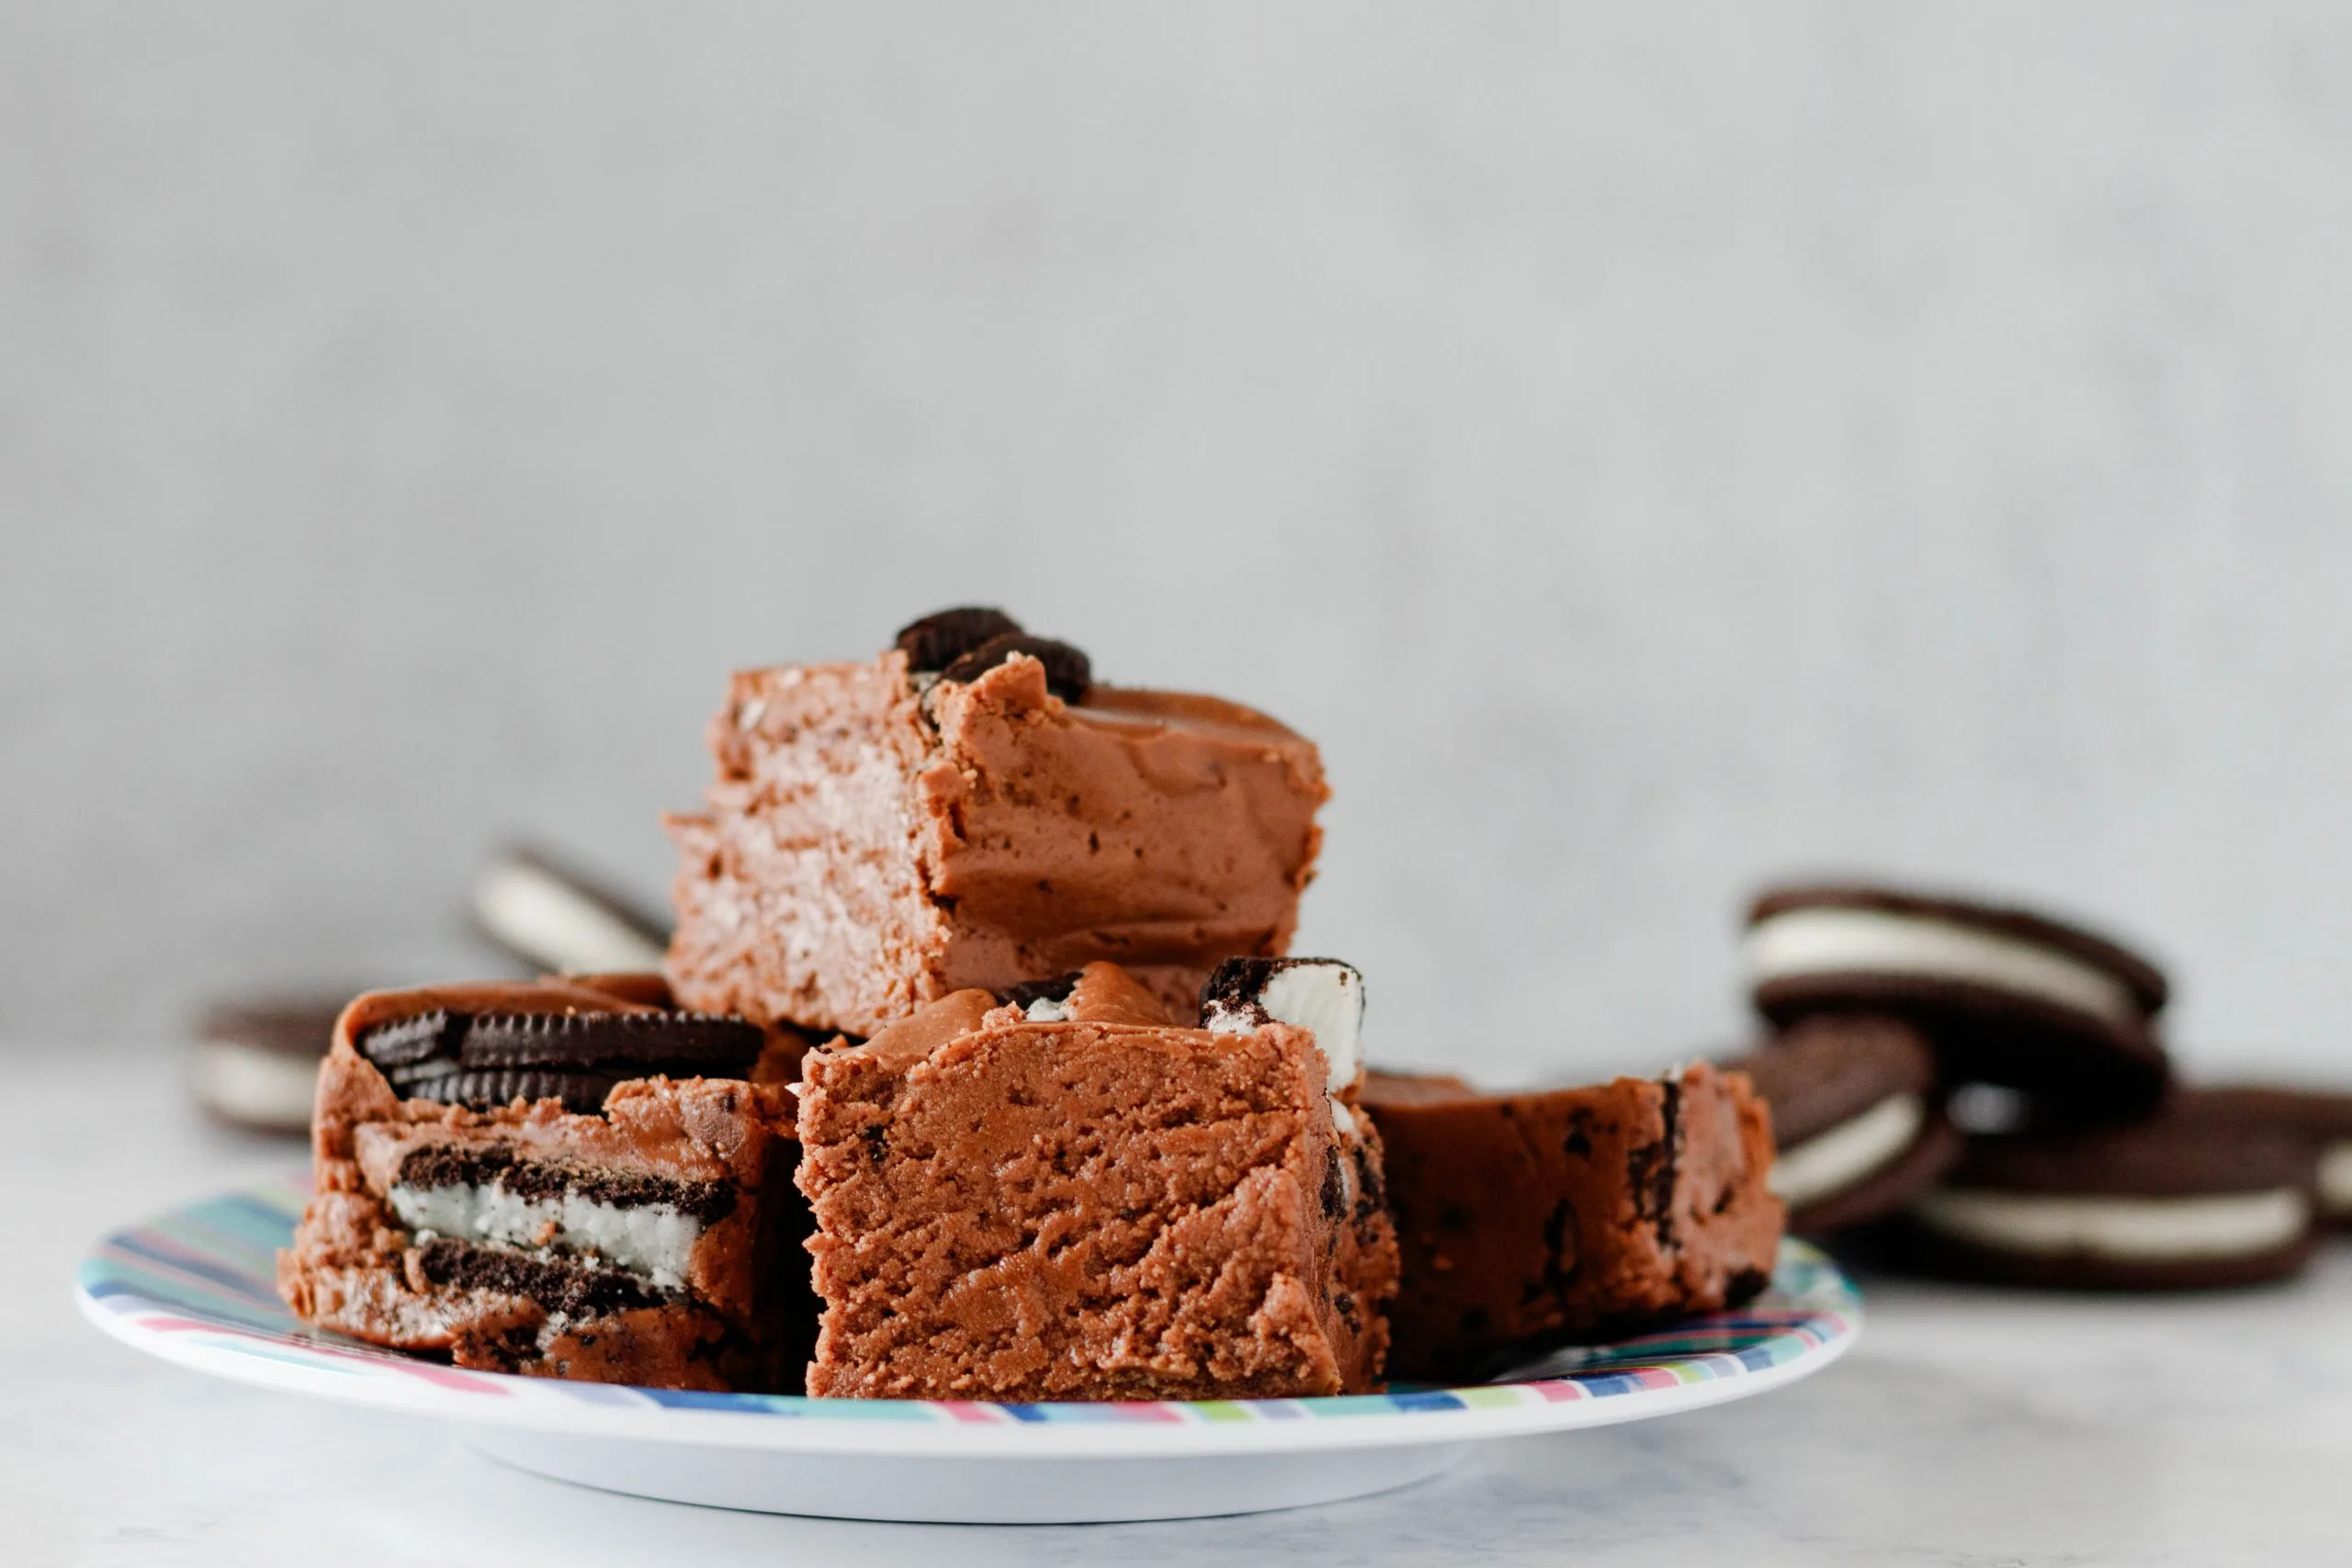 horizontal photo of the double chocolate oreo fudge on a striped plate. Cubes are arranged on a small plate to show texture of squares with cookies on the cut side and without